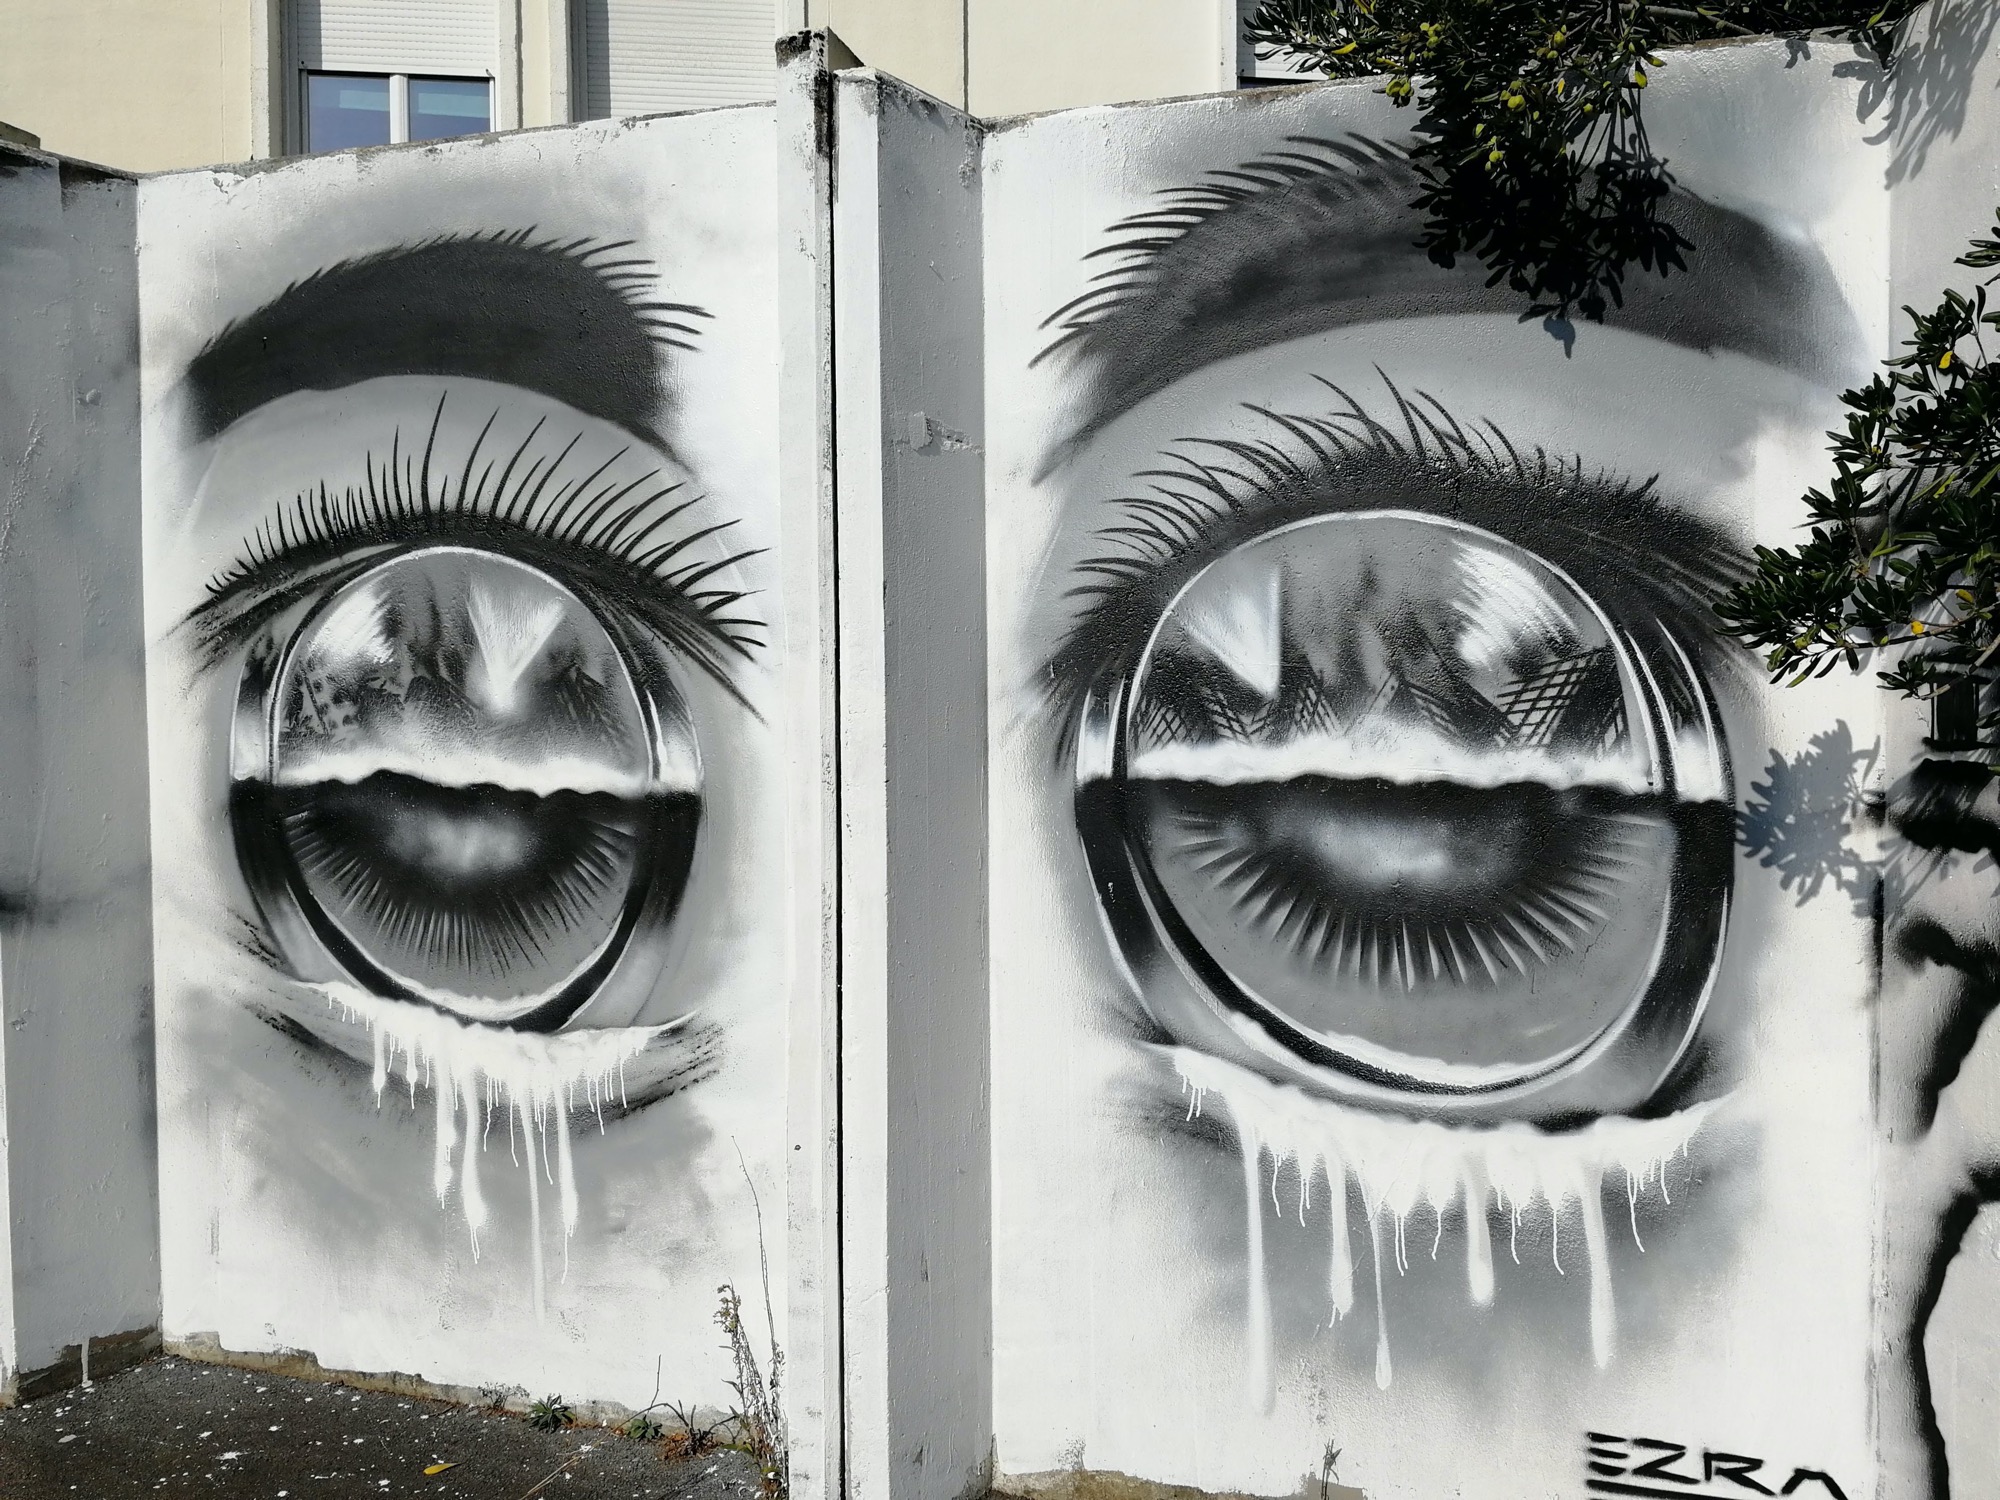 Graffiti 463  captured by Rabot in Nantes France